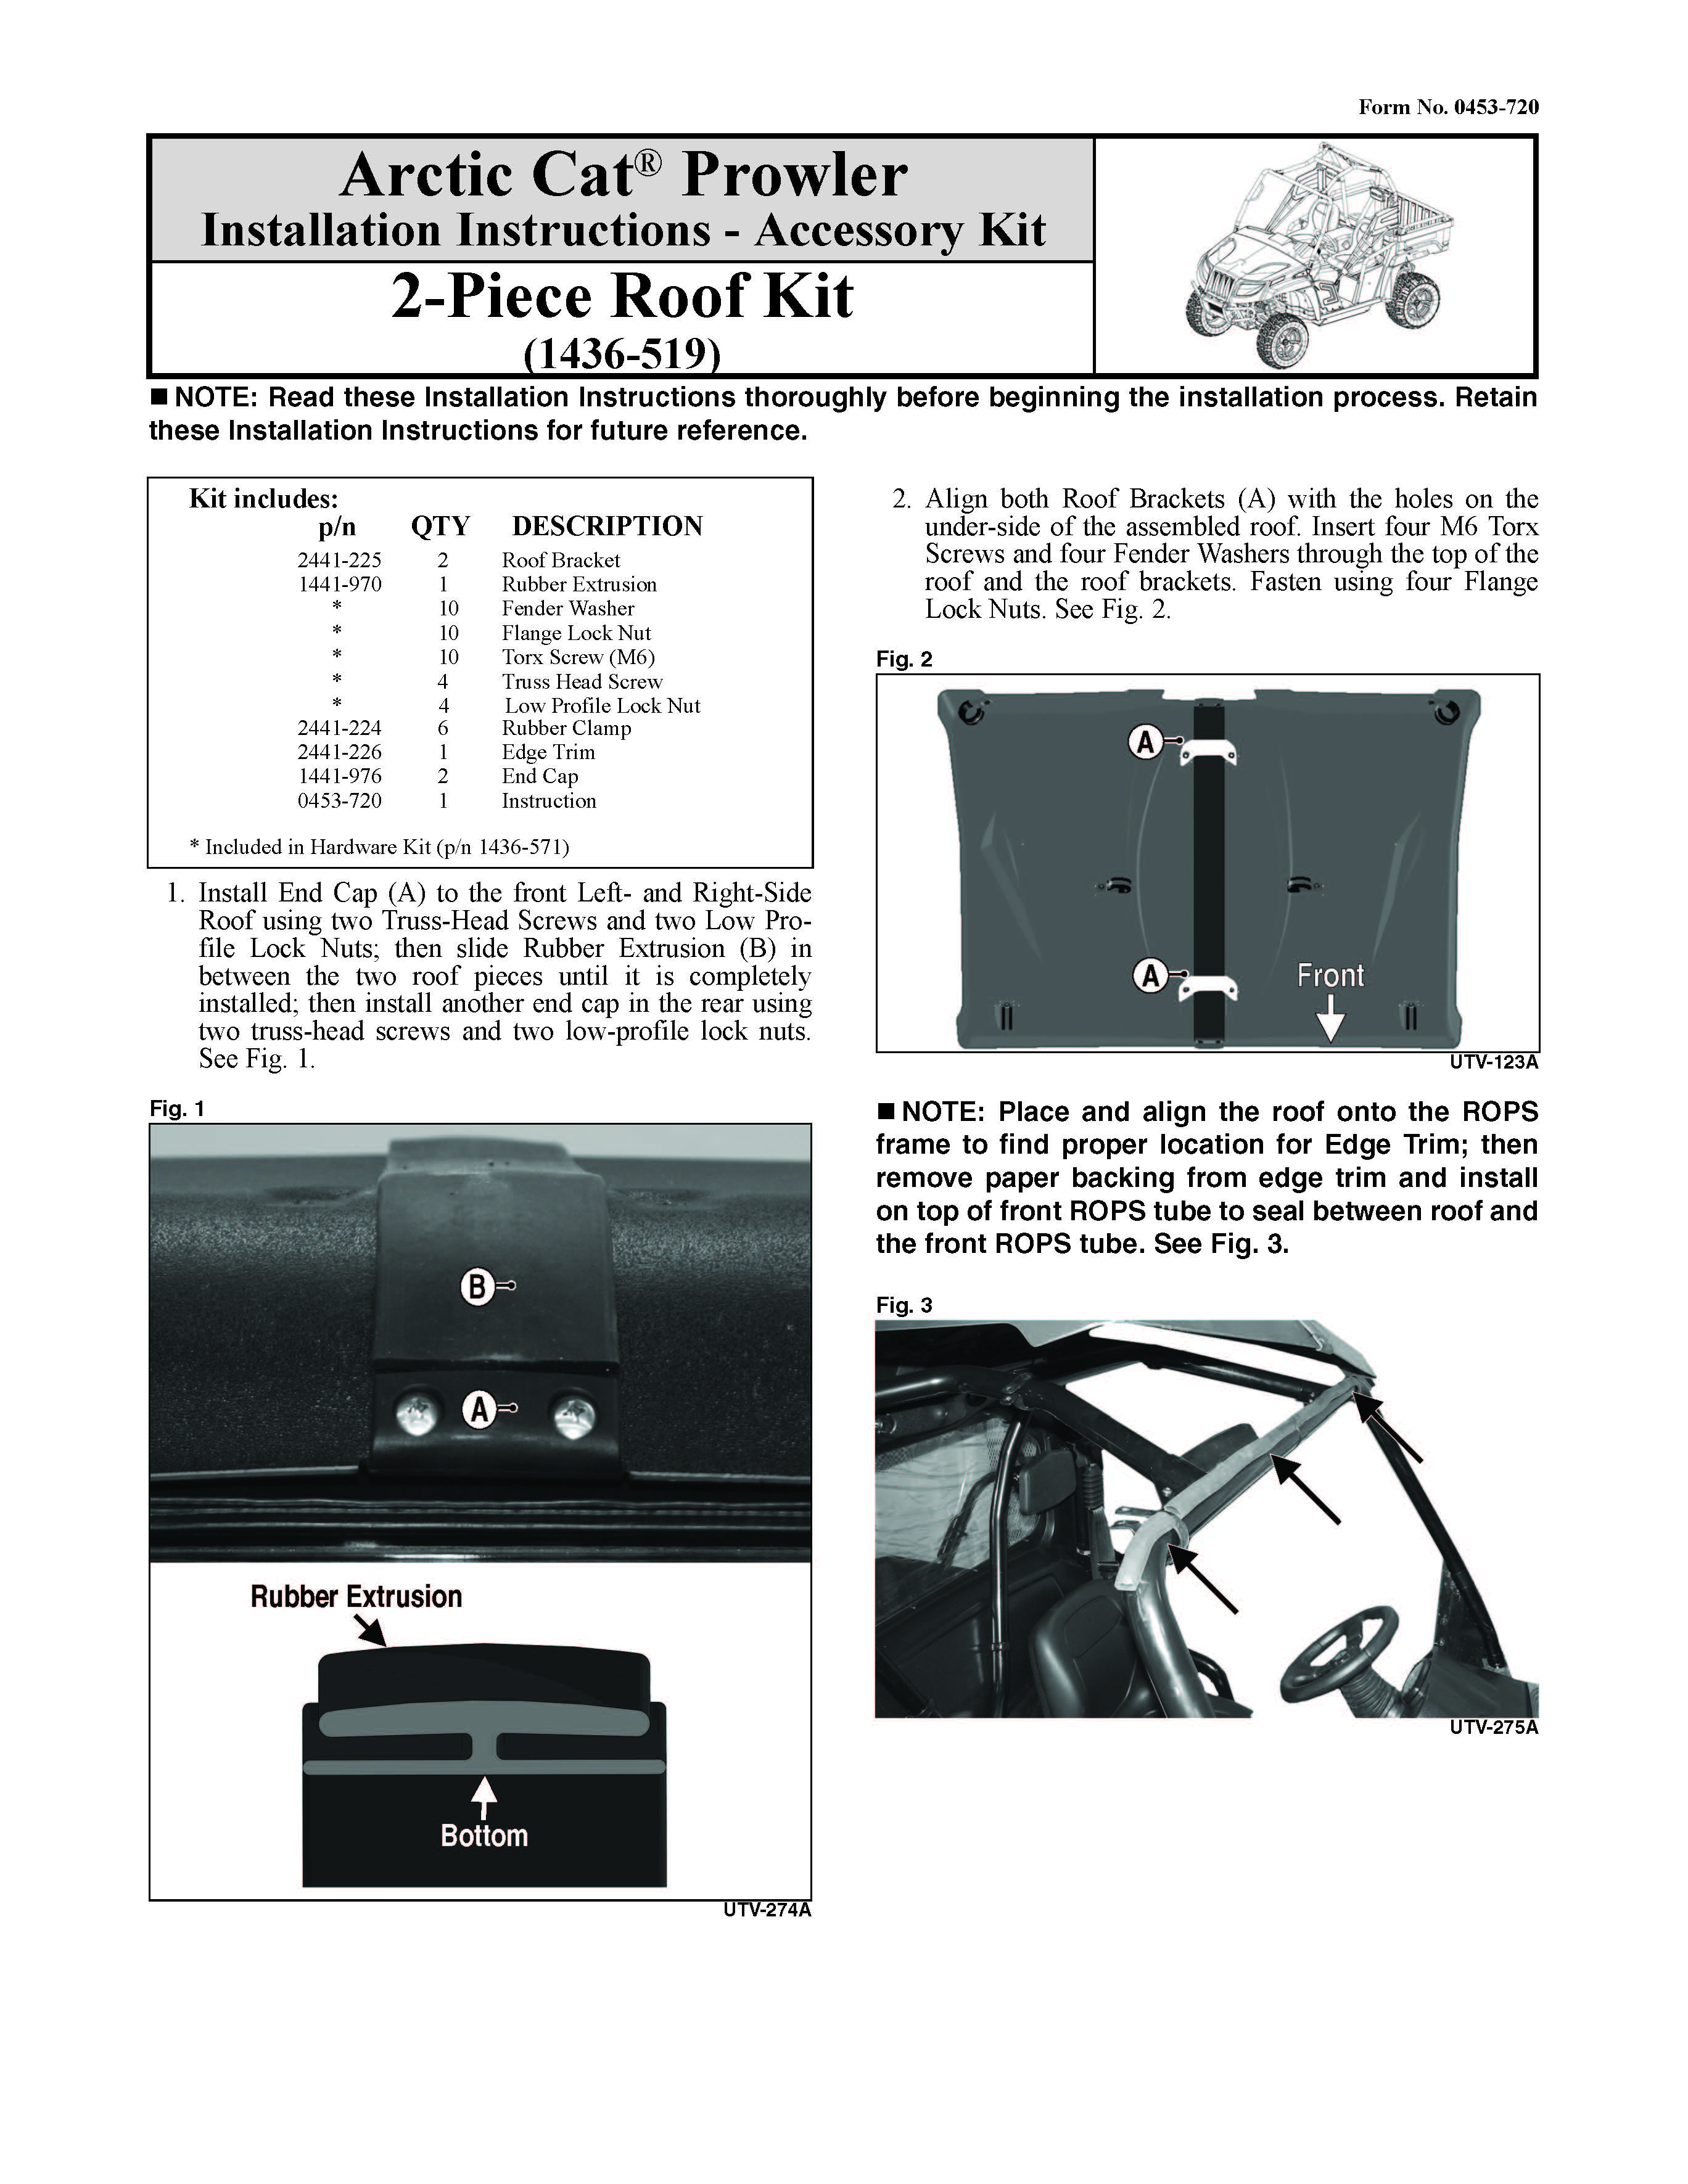 Arctic Cat Prowler Installation Instructions - Accessory Kit manual PDF